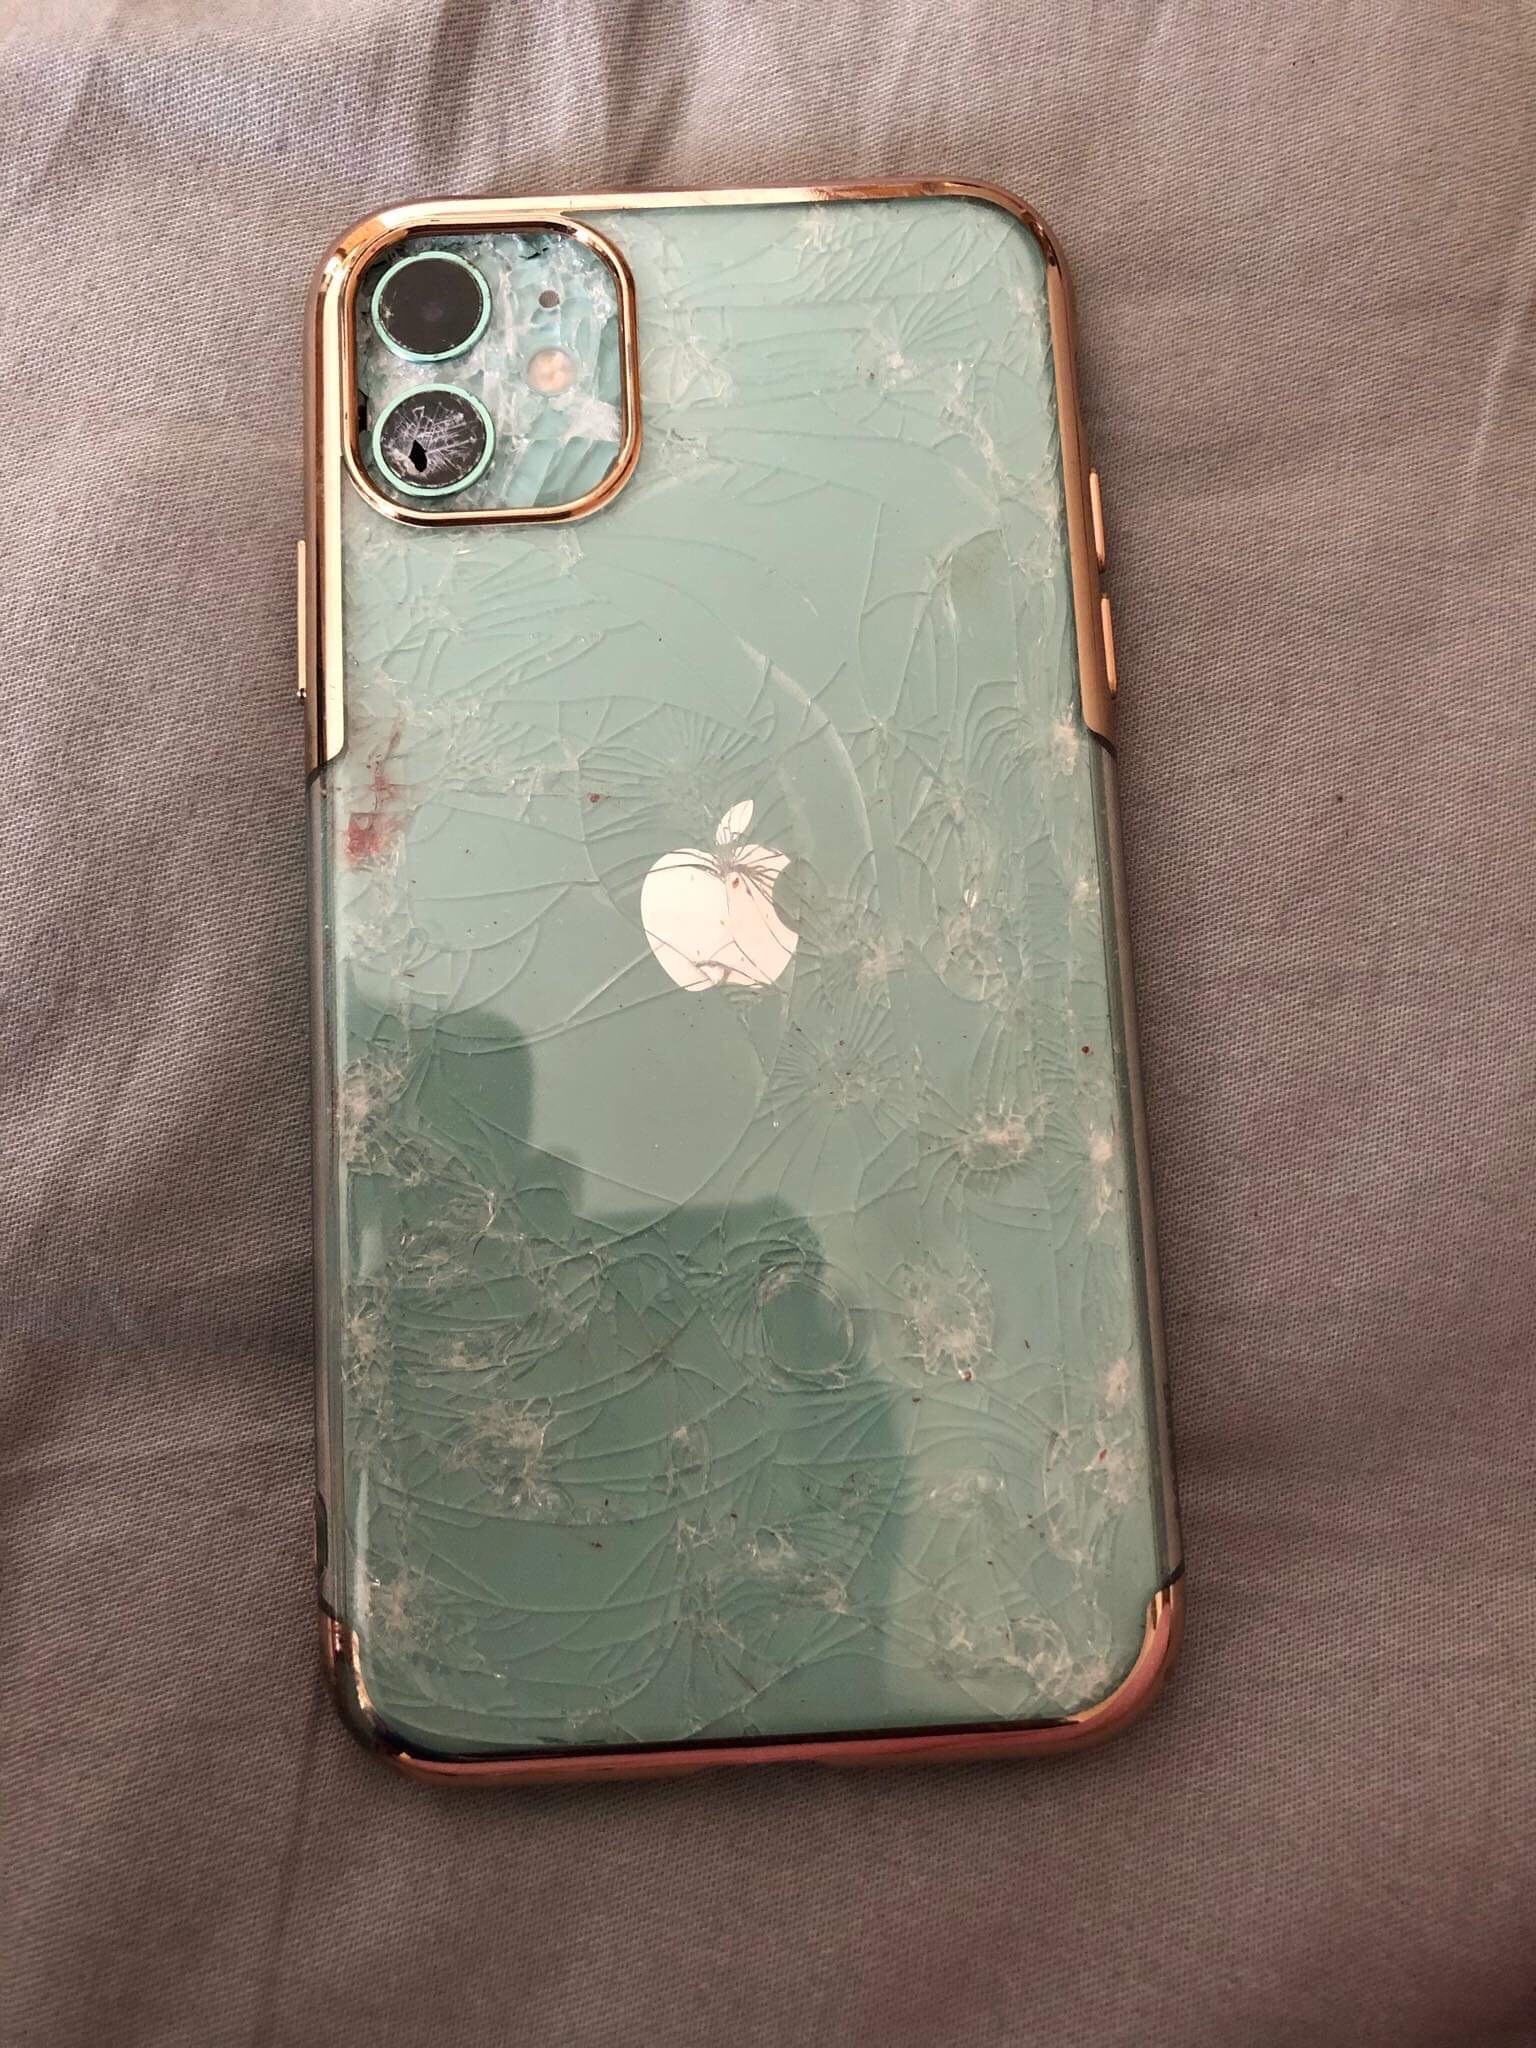 How To Fix Iphone 11 Screen Not Working